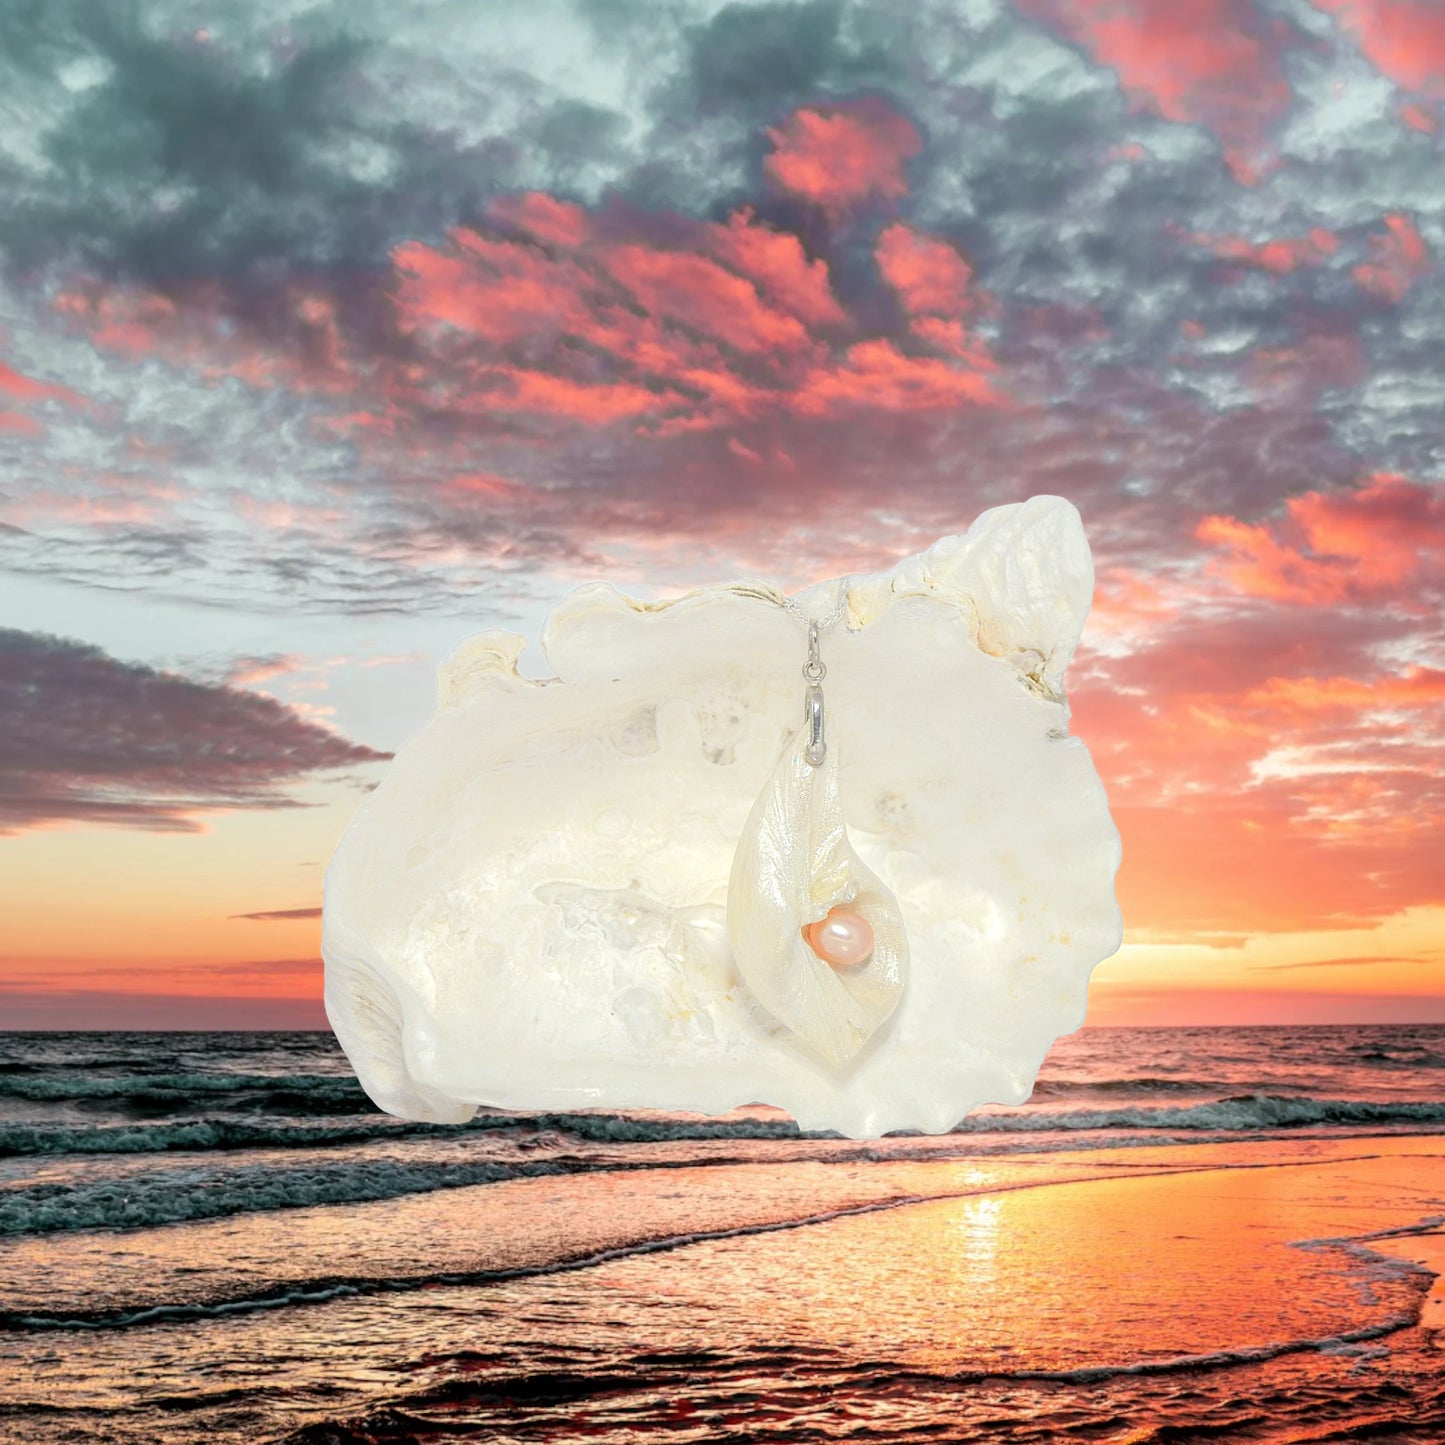 Athena is the name of the pendant being showcased.  It is a natural seashell from the beaches of Vancouver Island. The pendant has a real pink freshwater pearl and a faceted herkimer diamond. It is being showcased with a beautiful ocean sunset in the background.